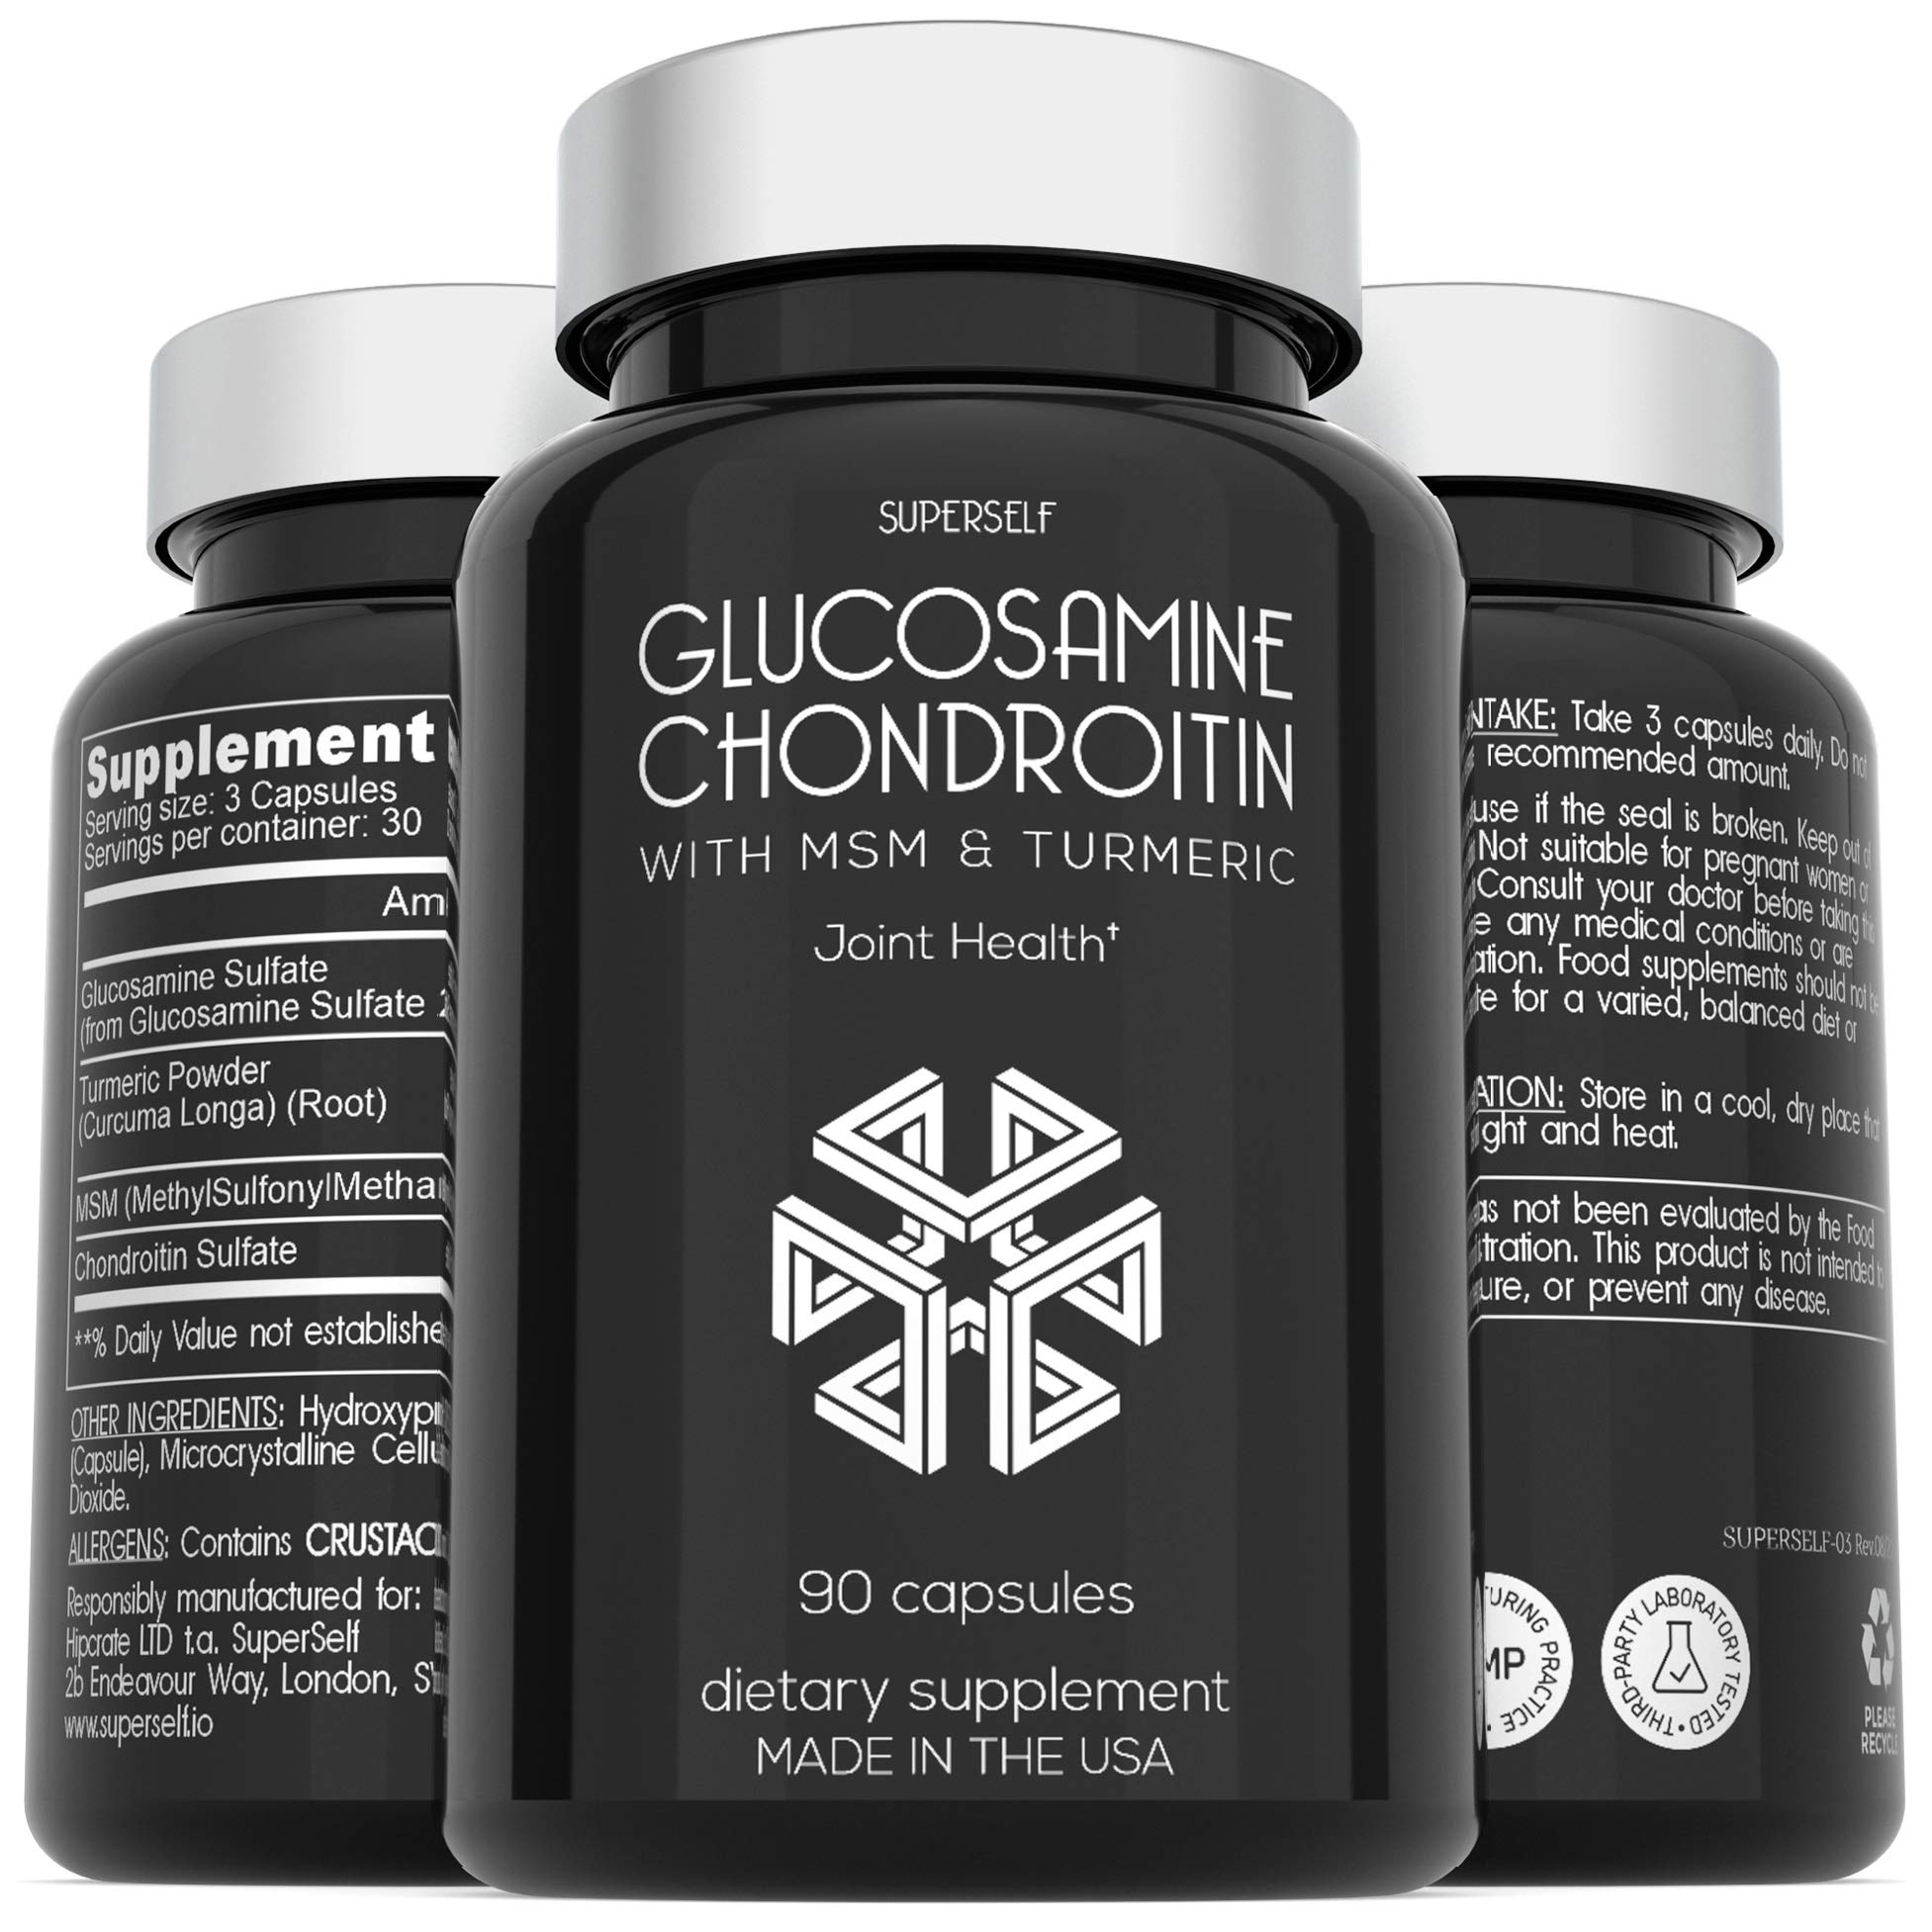 Glucosamine Chondroitin MSM with Turmeric - High Strength Joint Support Supplement for Adults Men & Women - 90 Capsules - 1500mg Glucosamine Sulfate per Serving